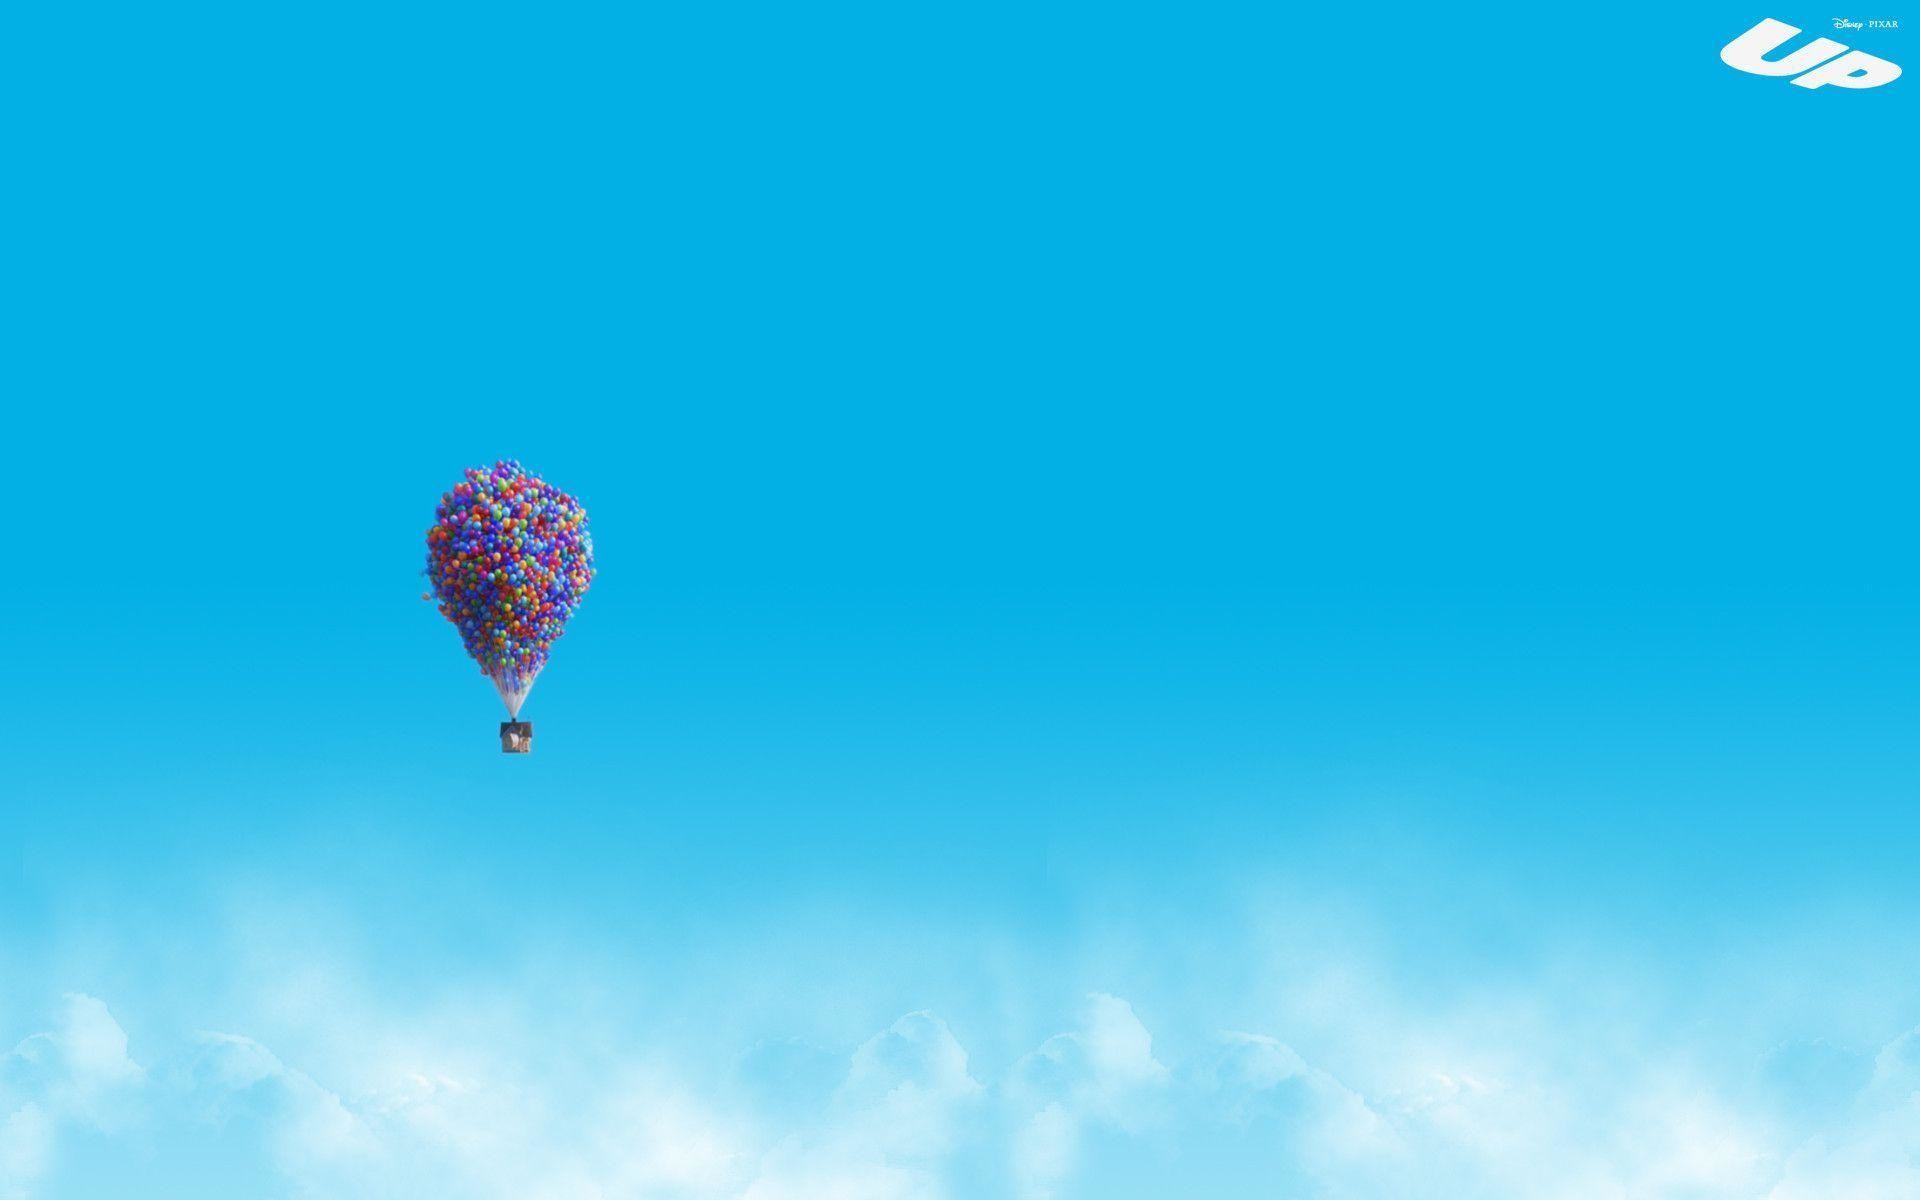 up the movie wallpaper